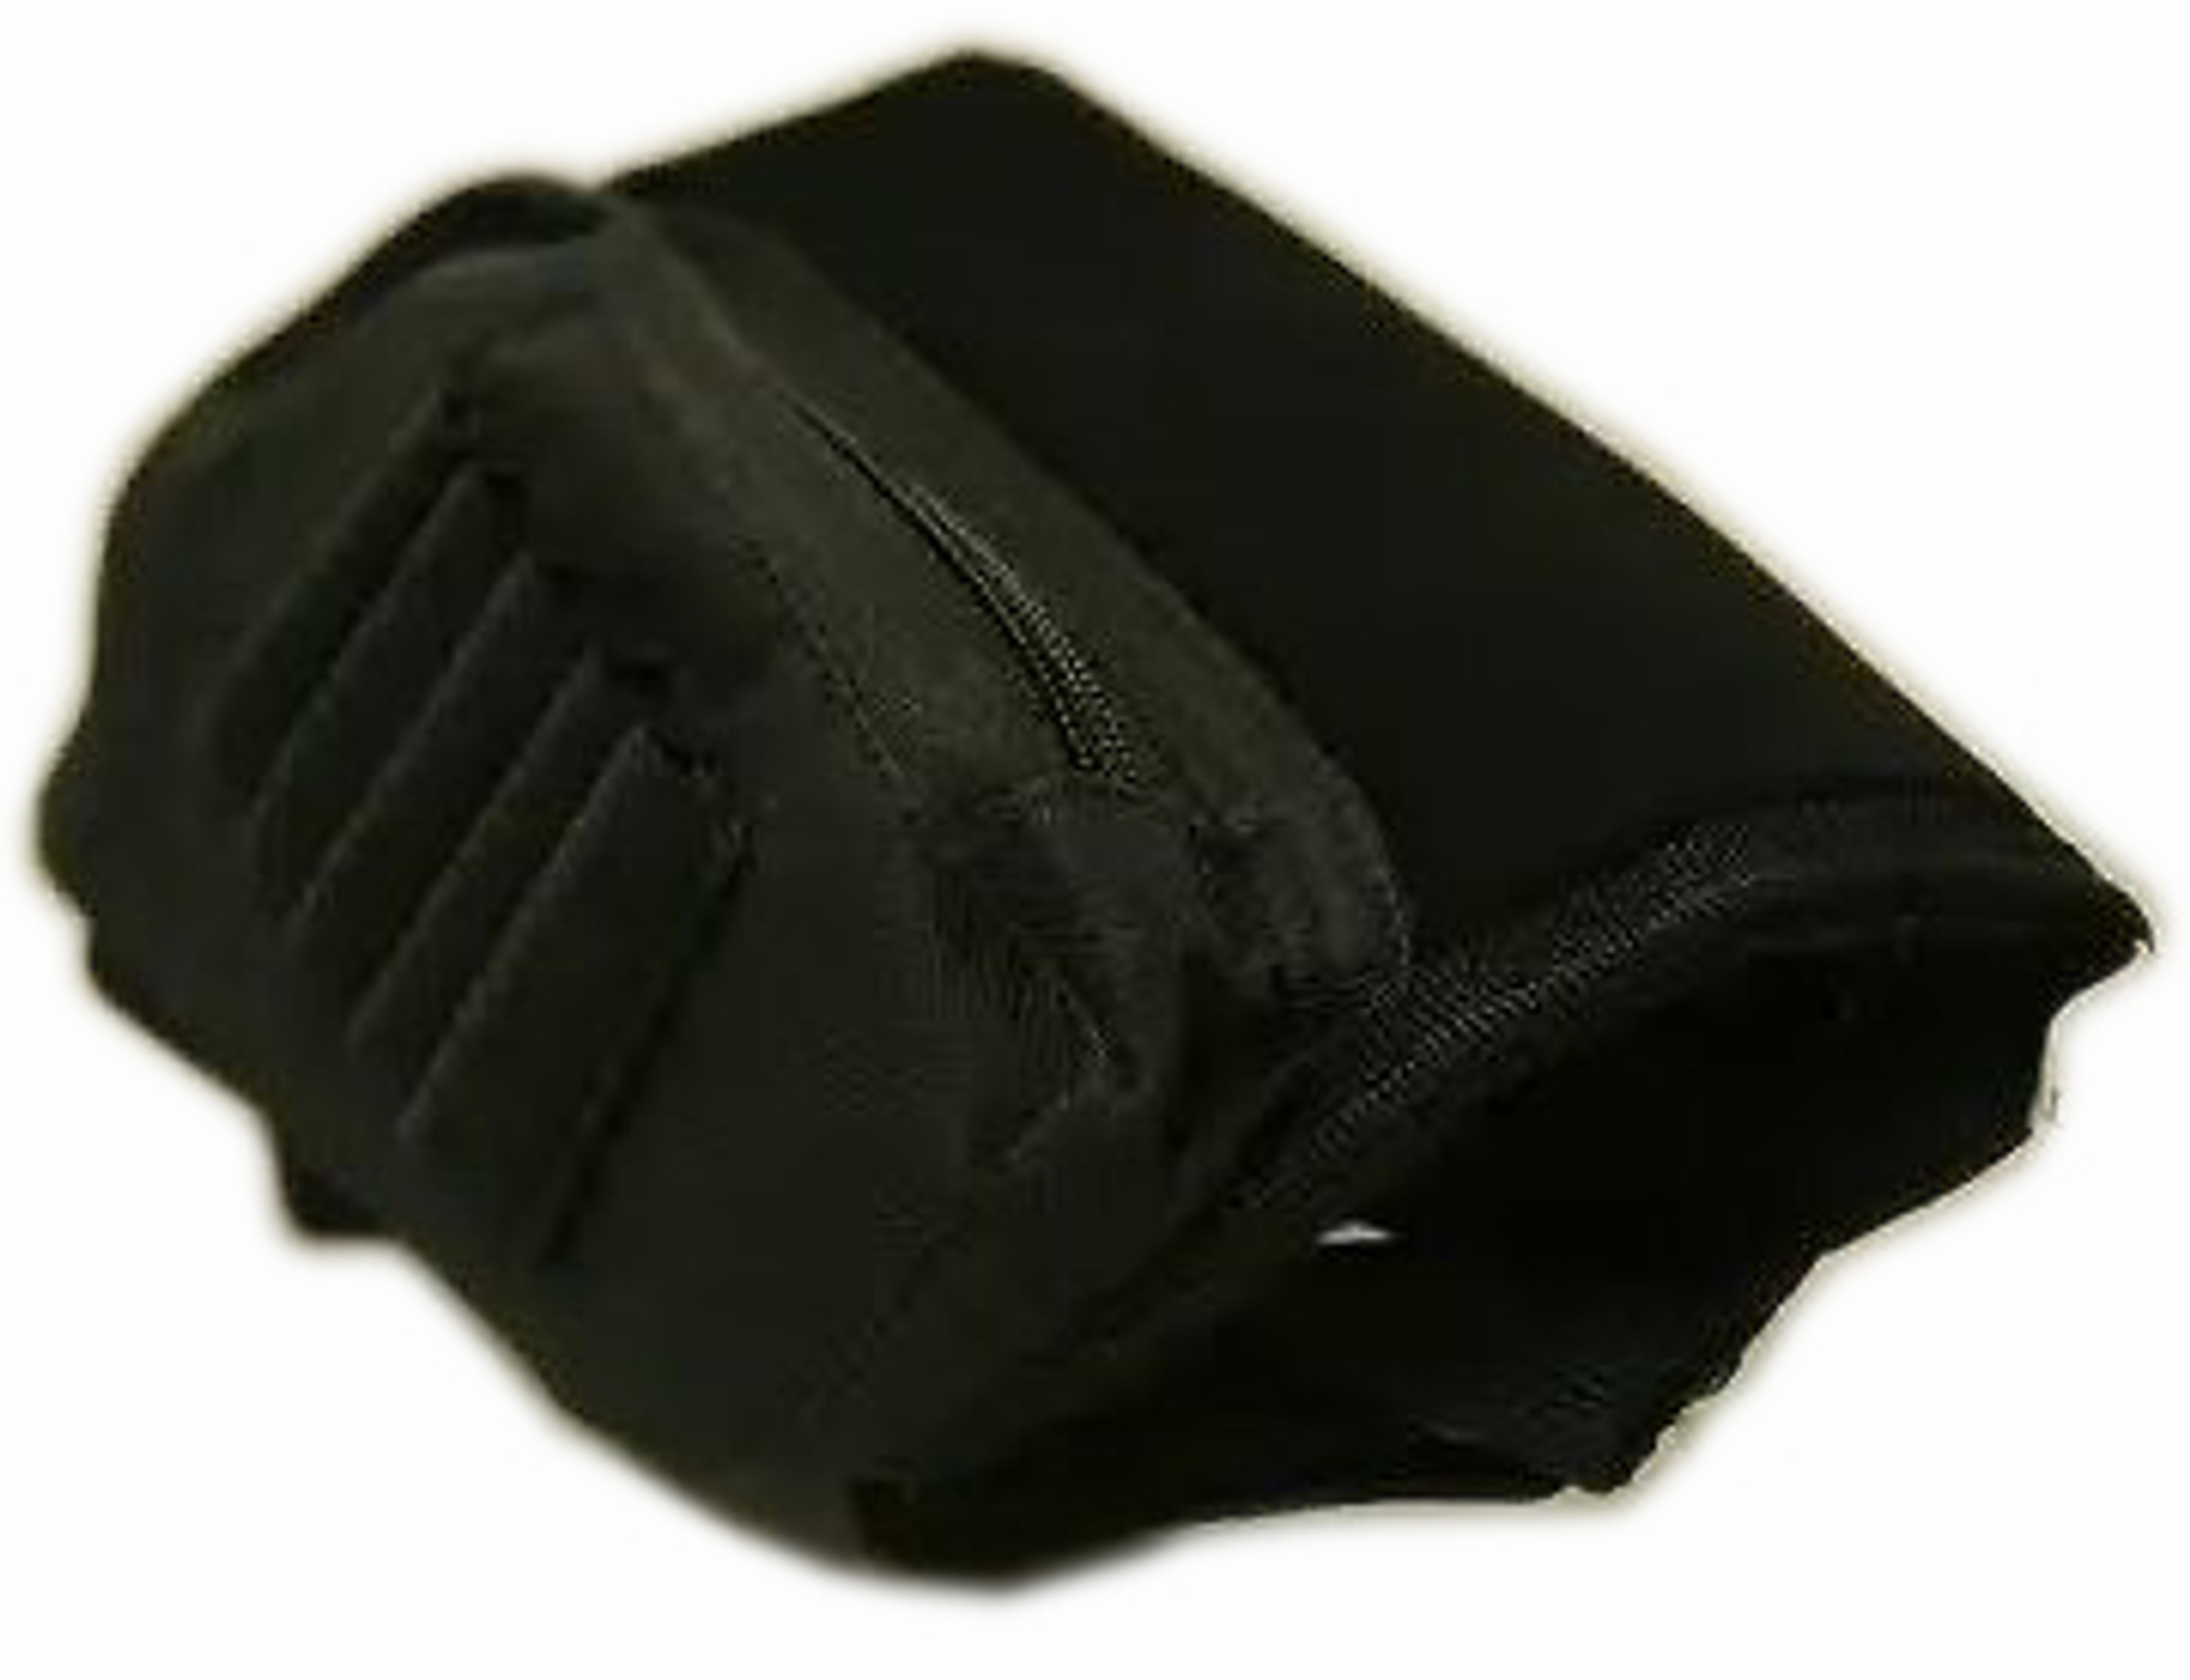 Buttstock Cheek Pad with Ammo Loops | AusHunter Online